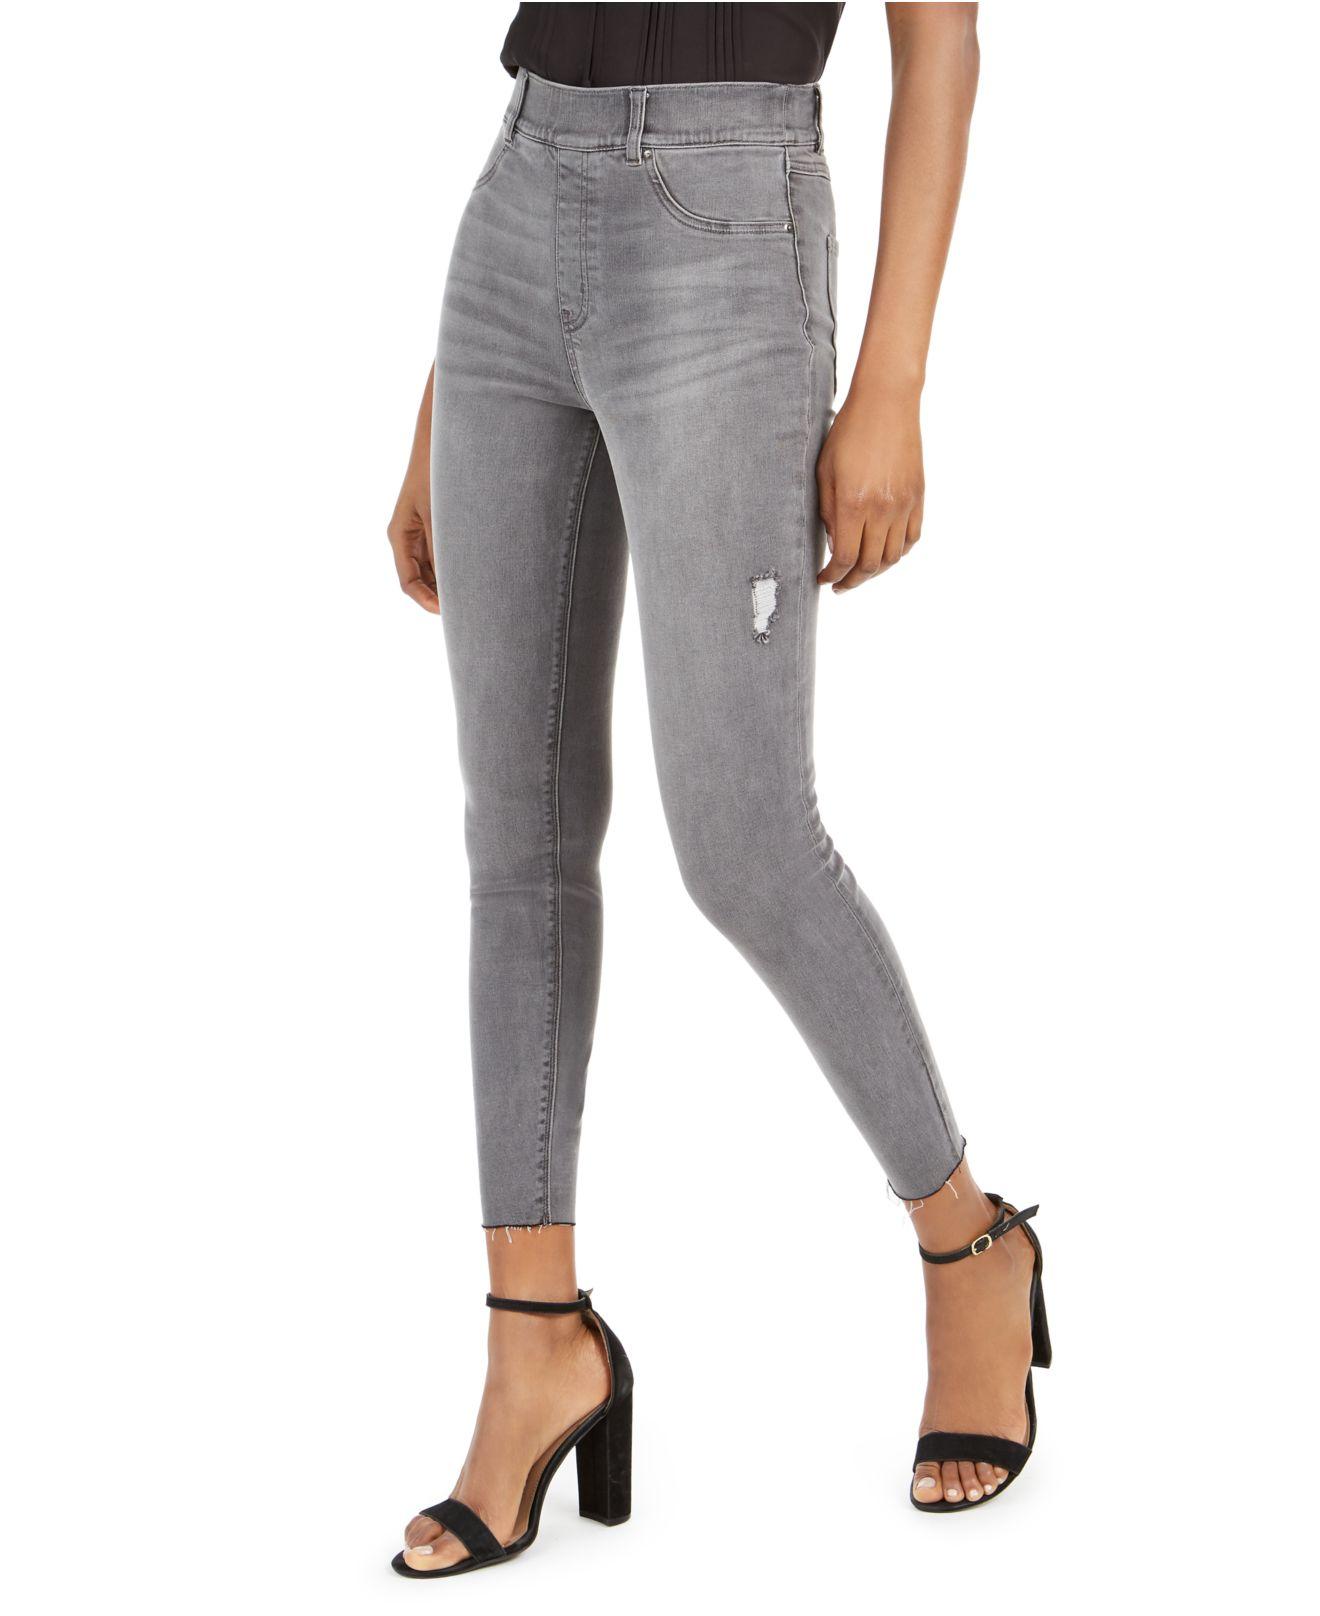 Spanx Distressed Skinny Jeans in Gray